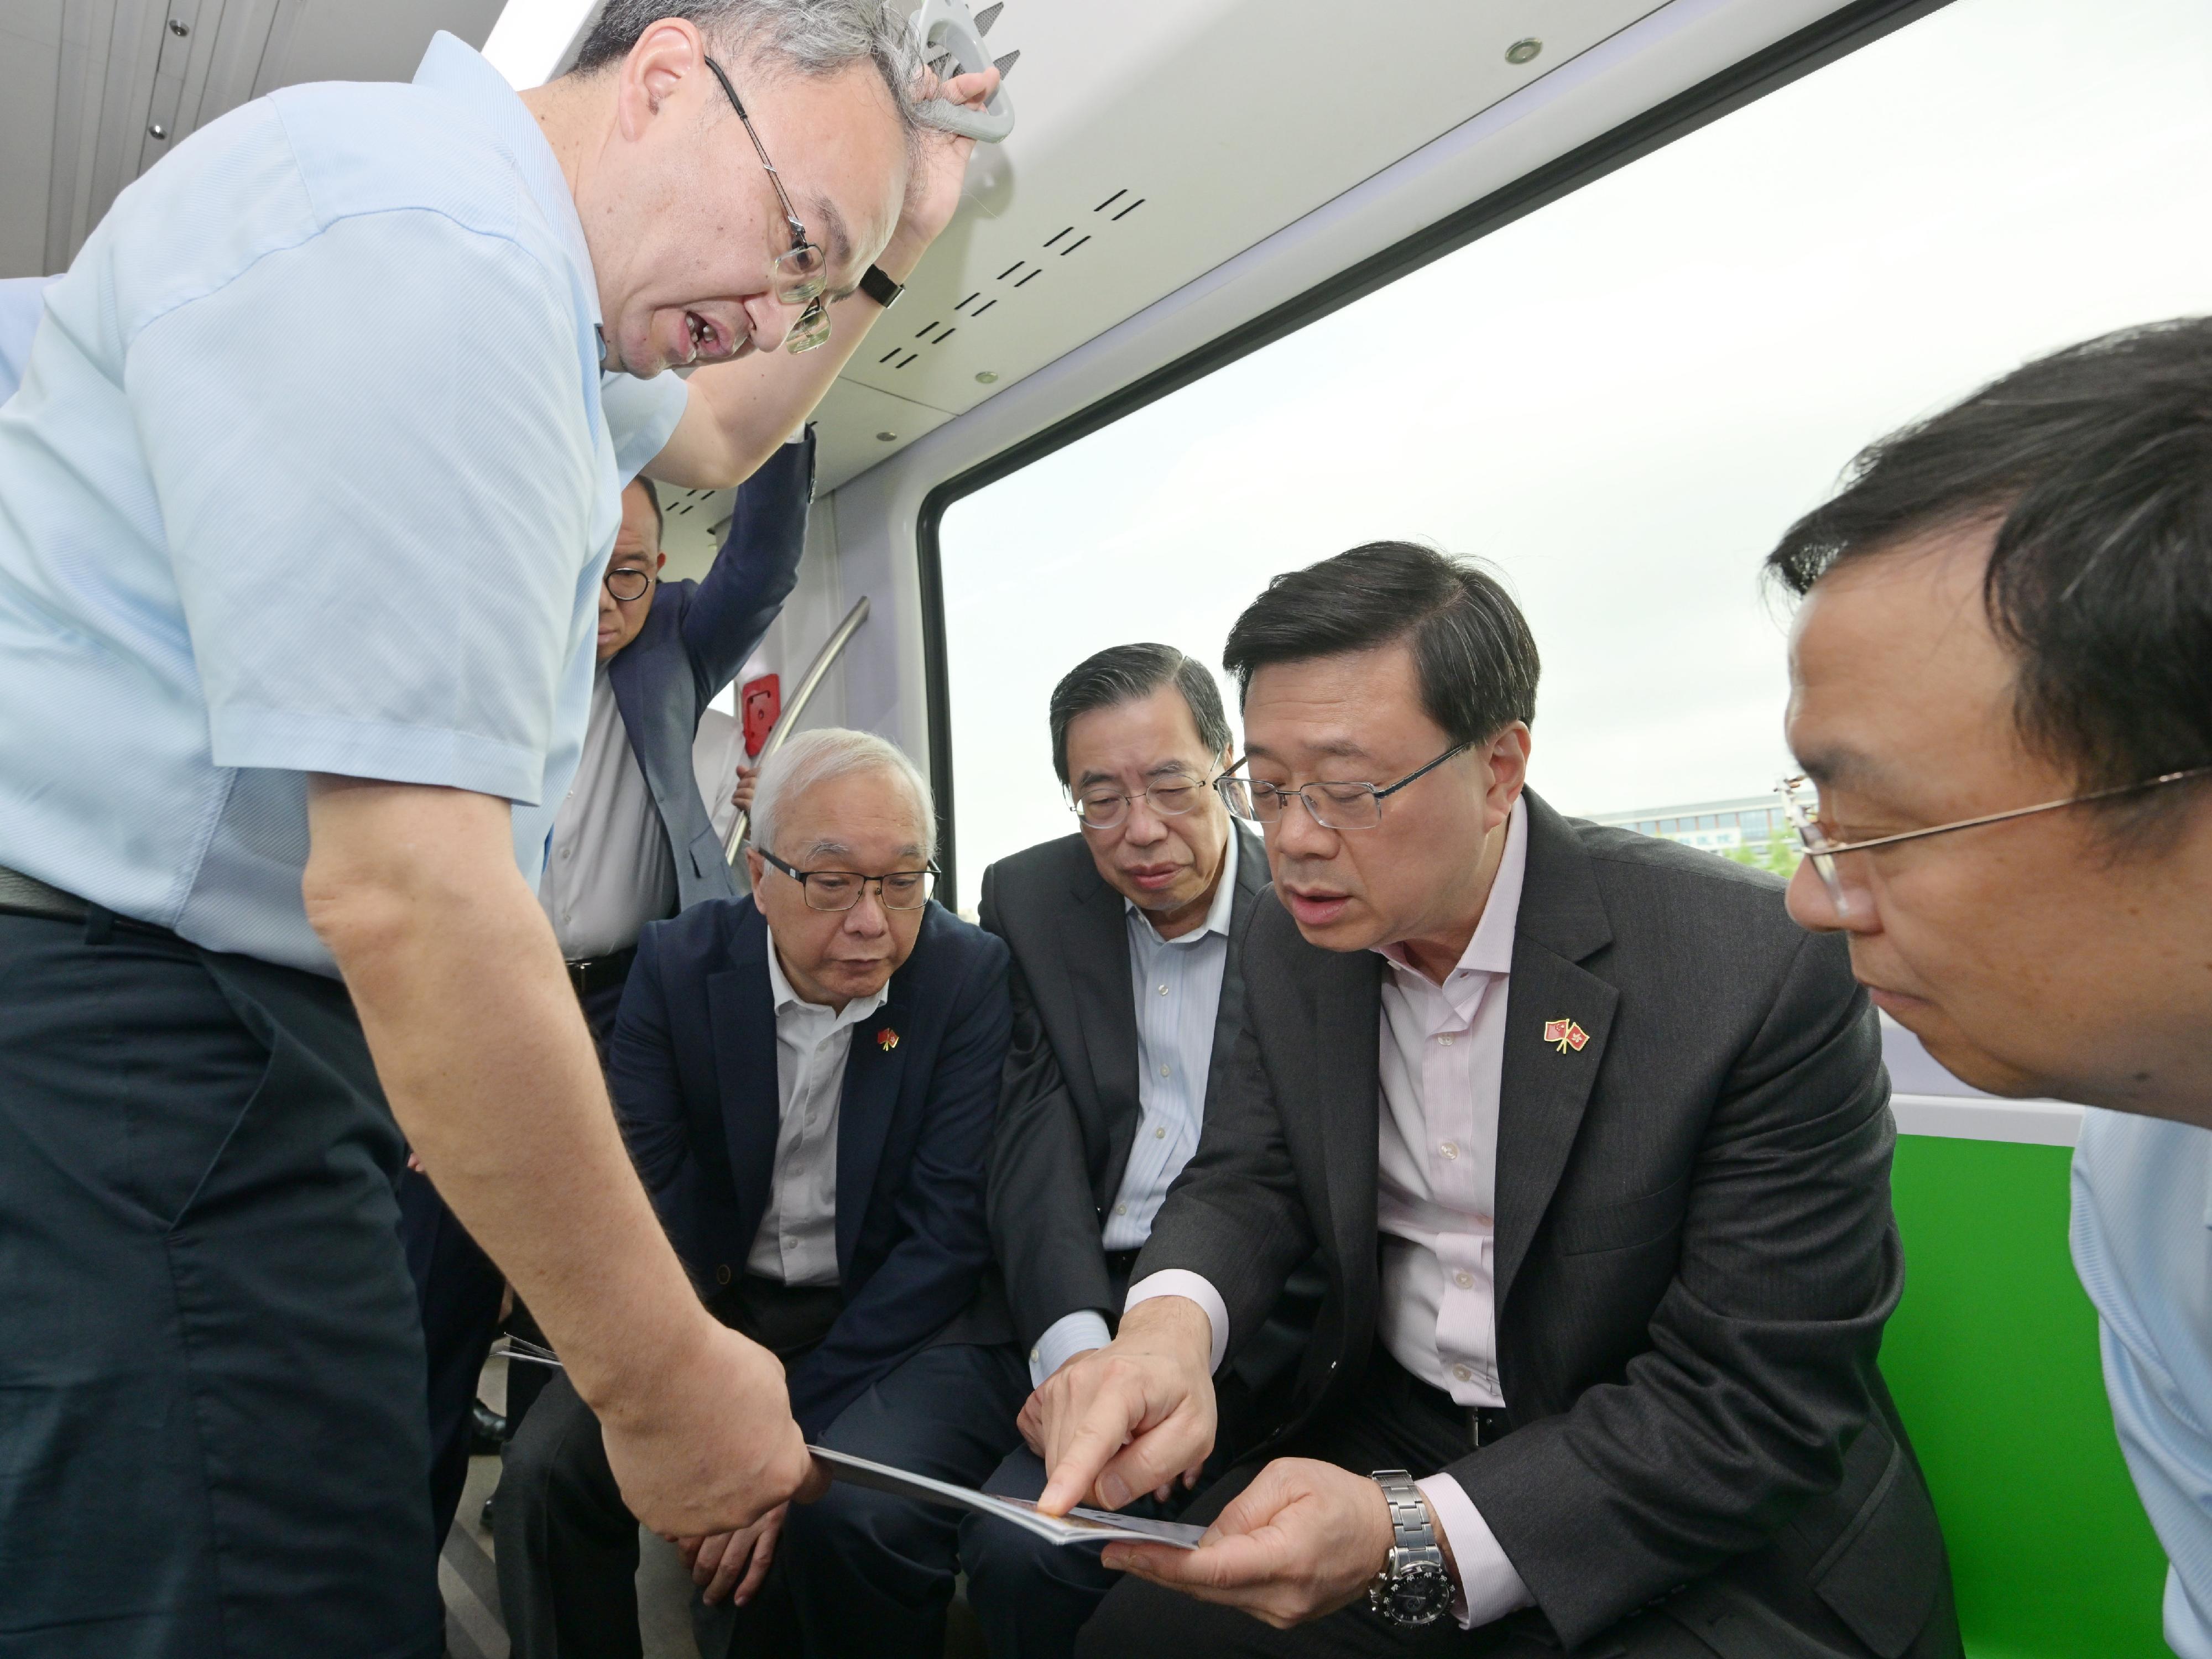 The Chief Executive, Mr John Lee, led a delegation of the Hong Kong Special Administrative Region Government and the Legislative Council (LegCo) to visit Shenzhen today (April 22). Photo shows Mr Lee (second right); the President of the LegCo, Mr Andrew Leung (third right); the Secretary for Environment and Ecology, Mr Tse Chin-wan (fourth right), and the Chairman and President of BYD Company Limited, Mr Wang Chuanfu (first right), visiting the BYD Sky Shuttle.